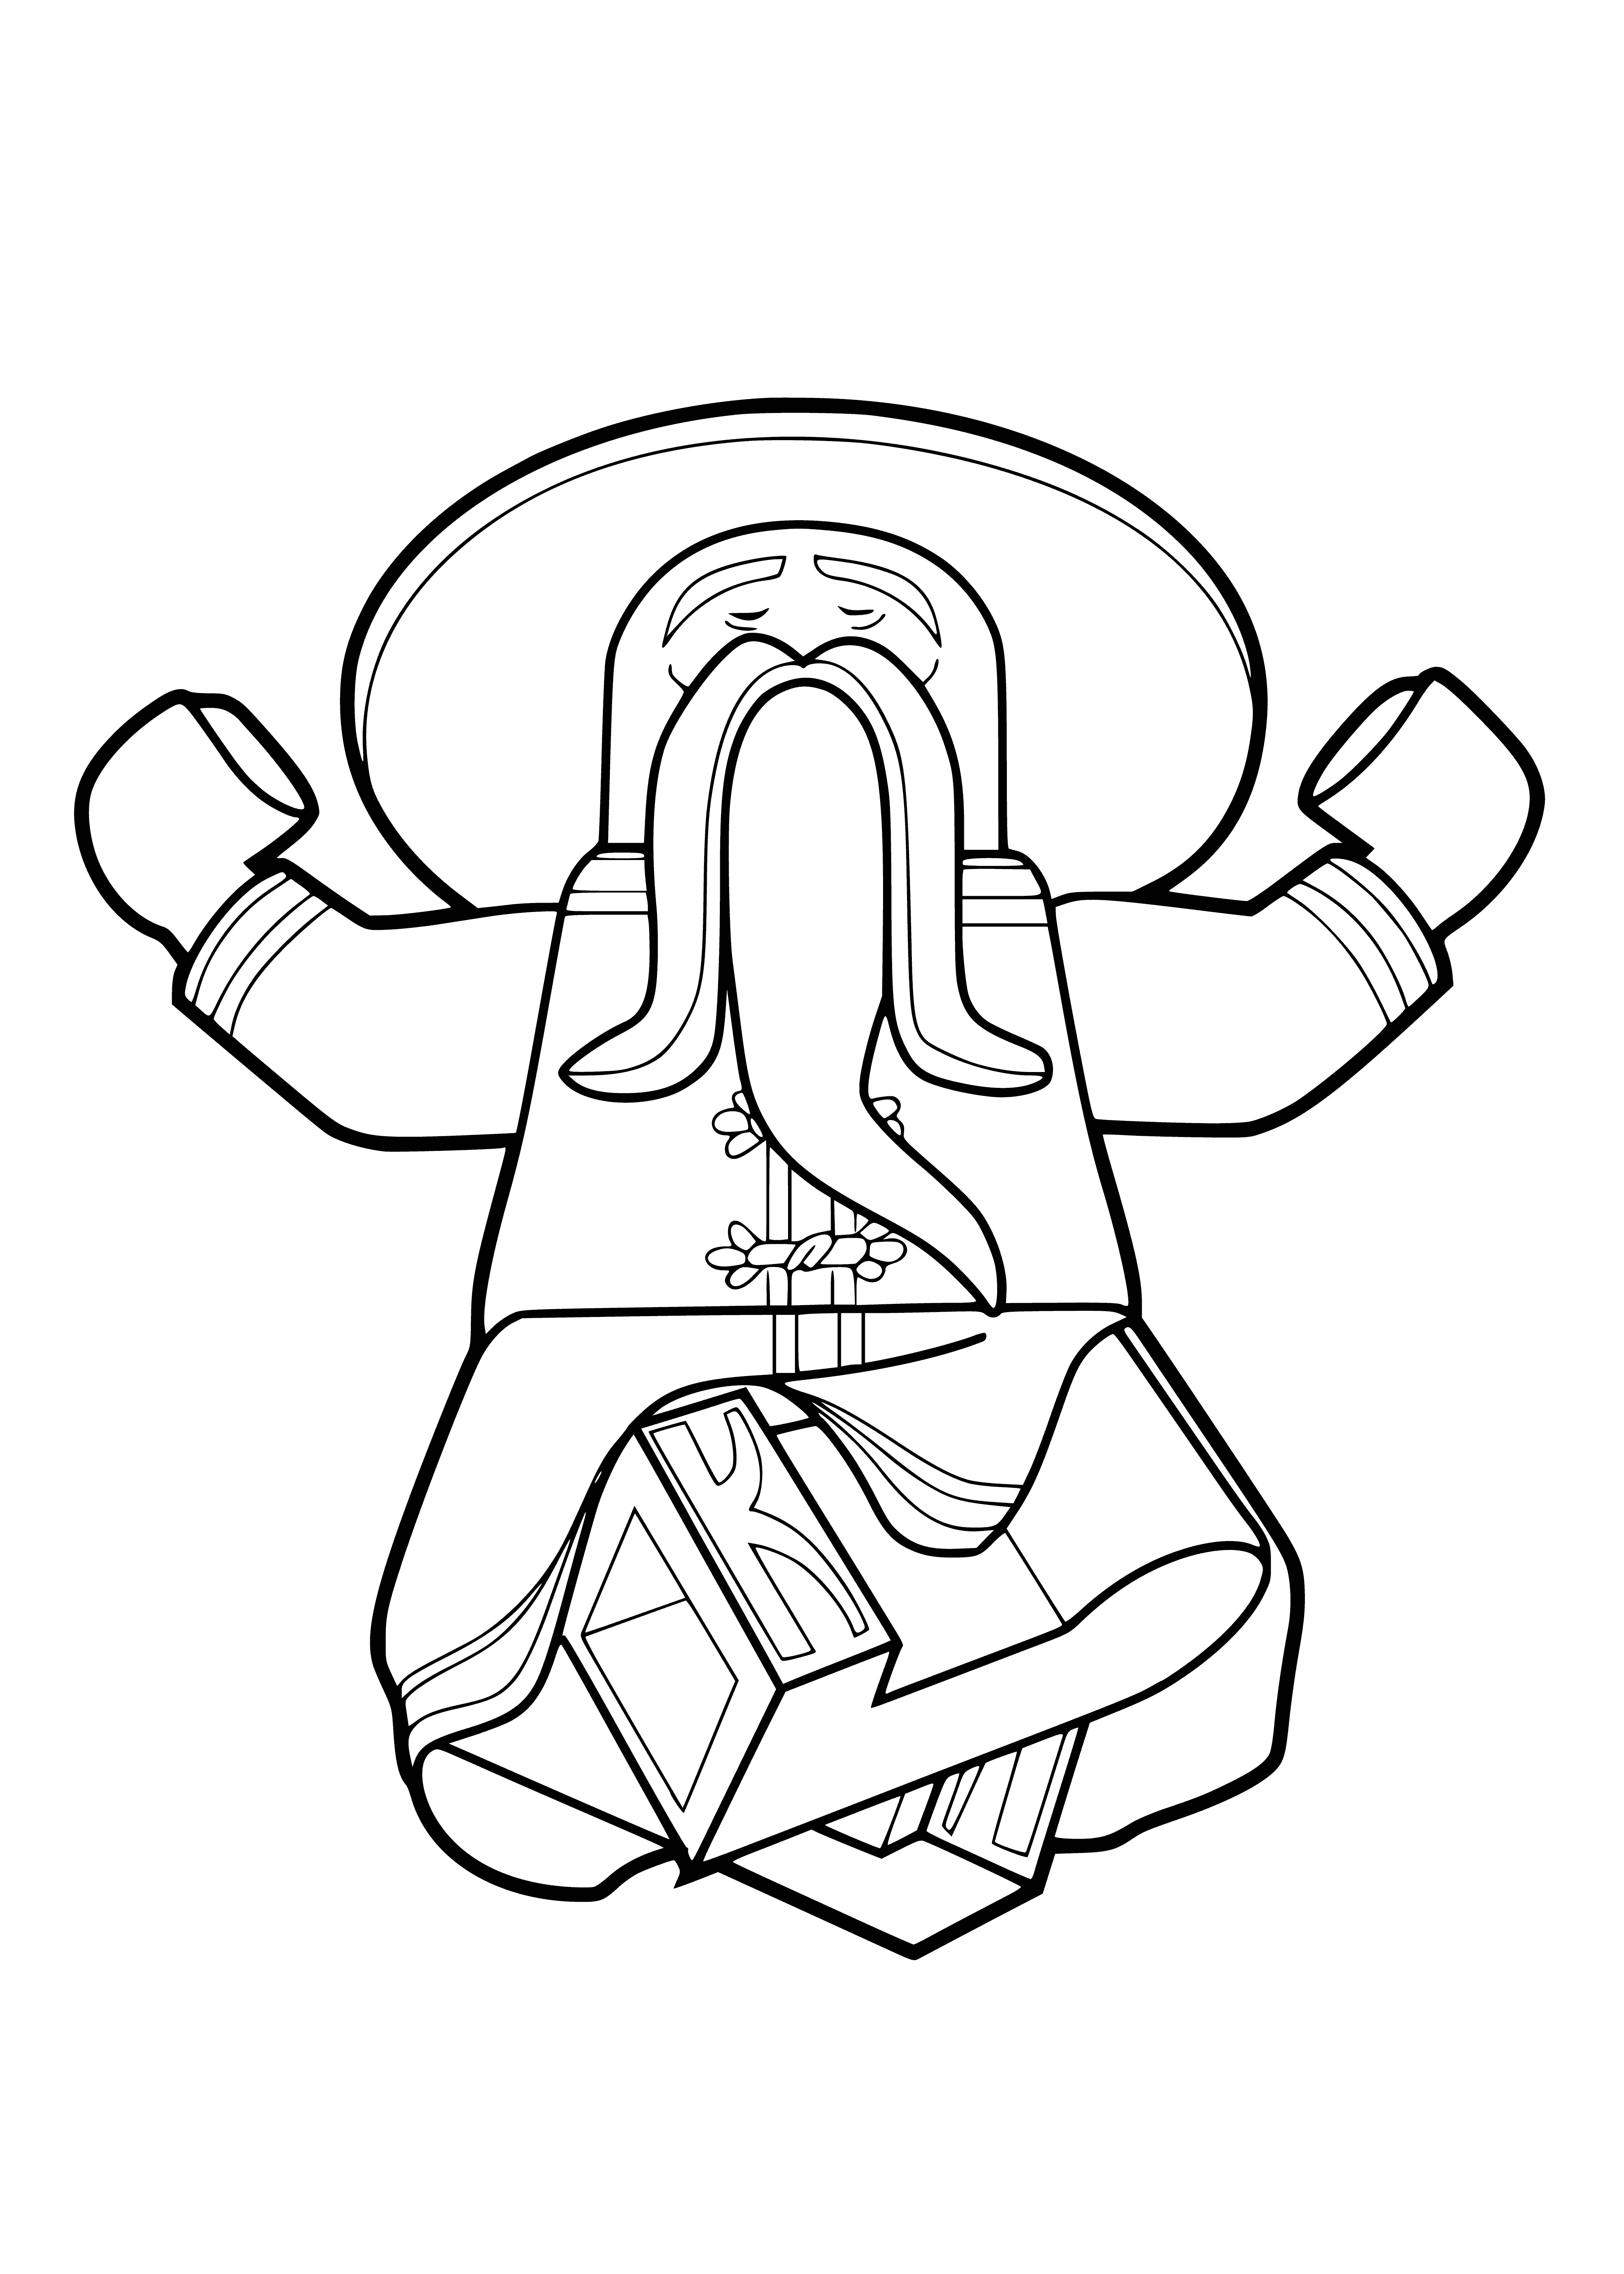 Teacher coloring page